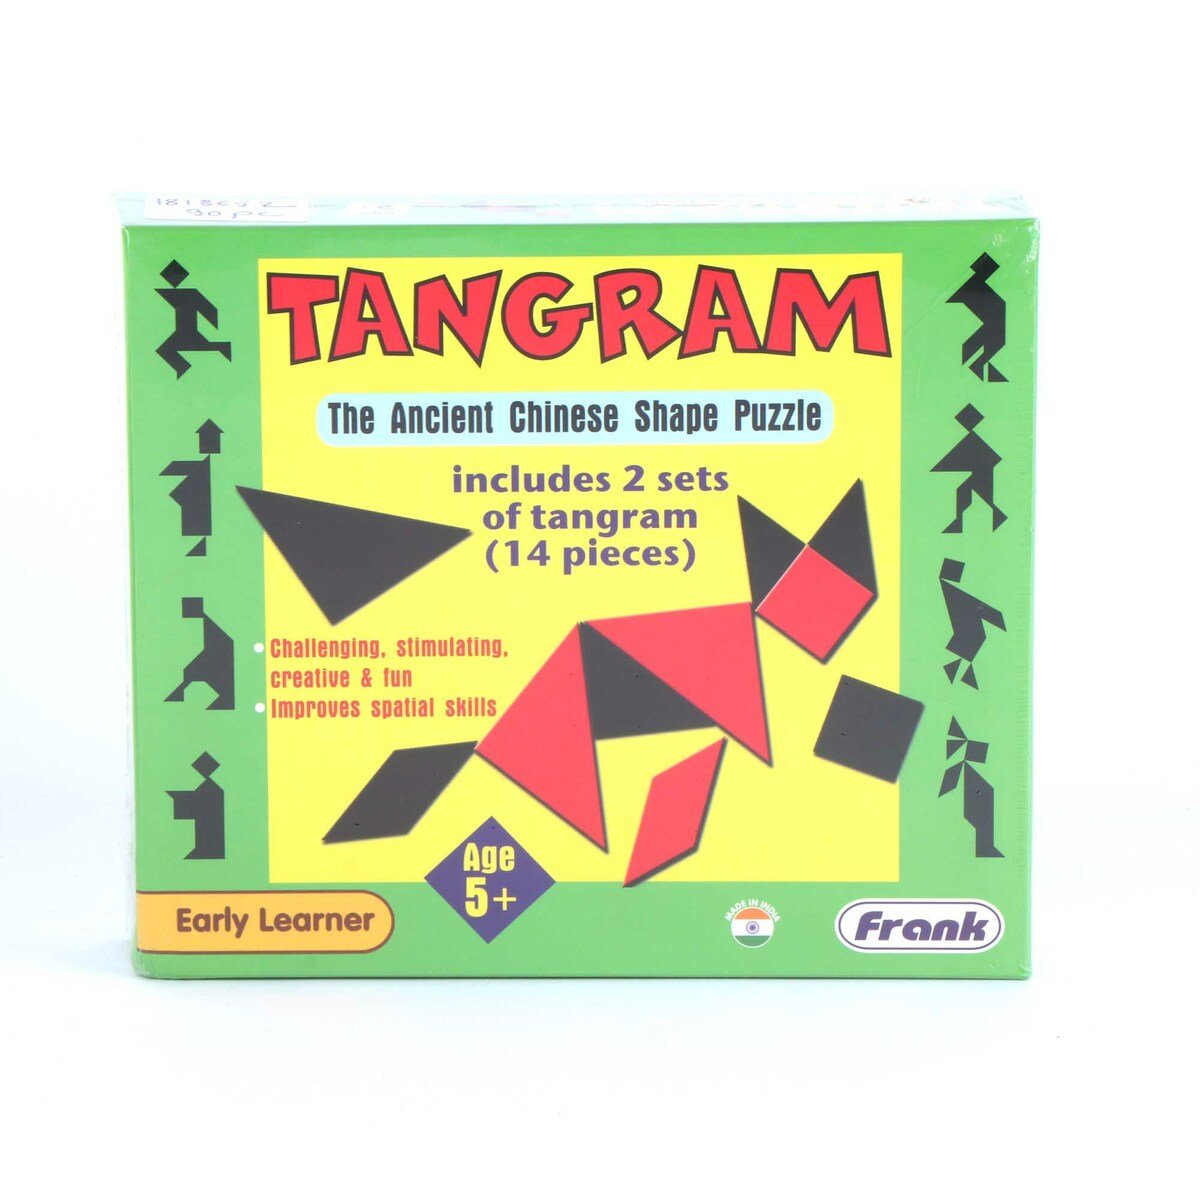 Frank Tangram The Ancient Chinese Shape Puzzle 10369